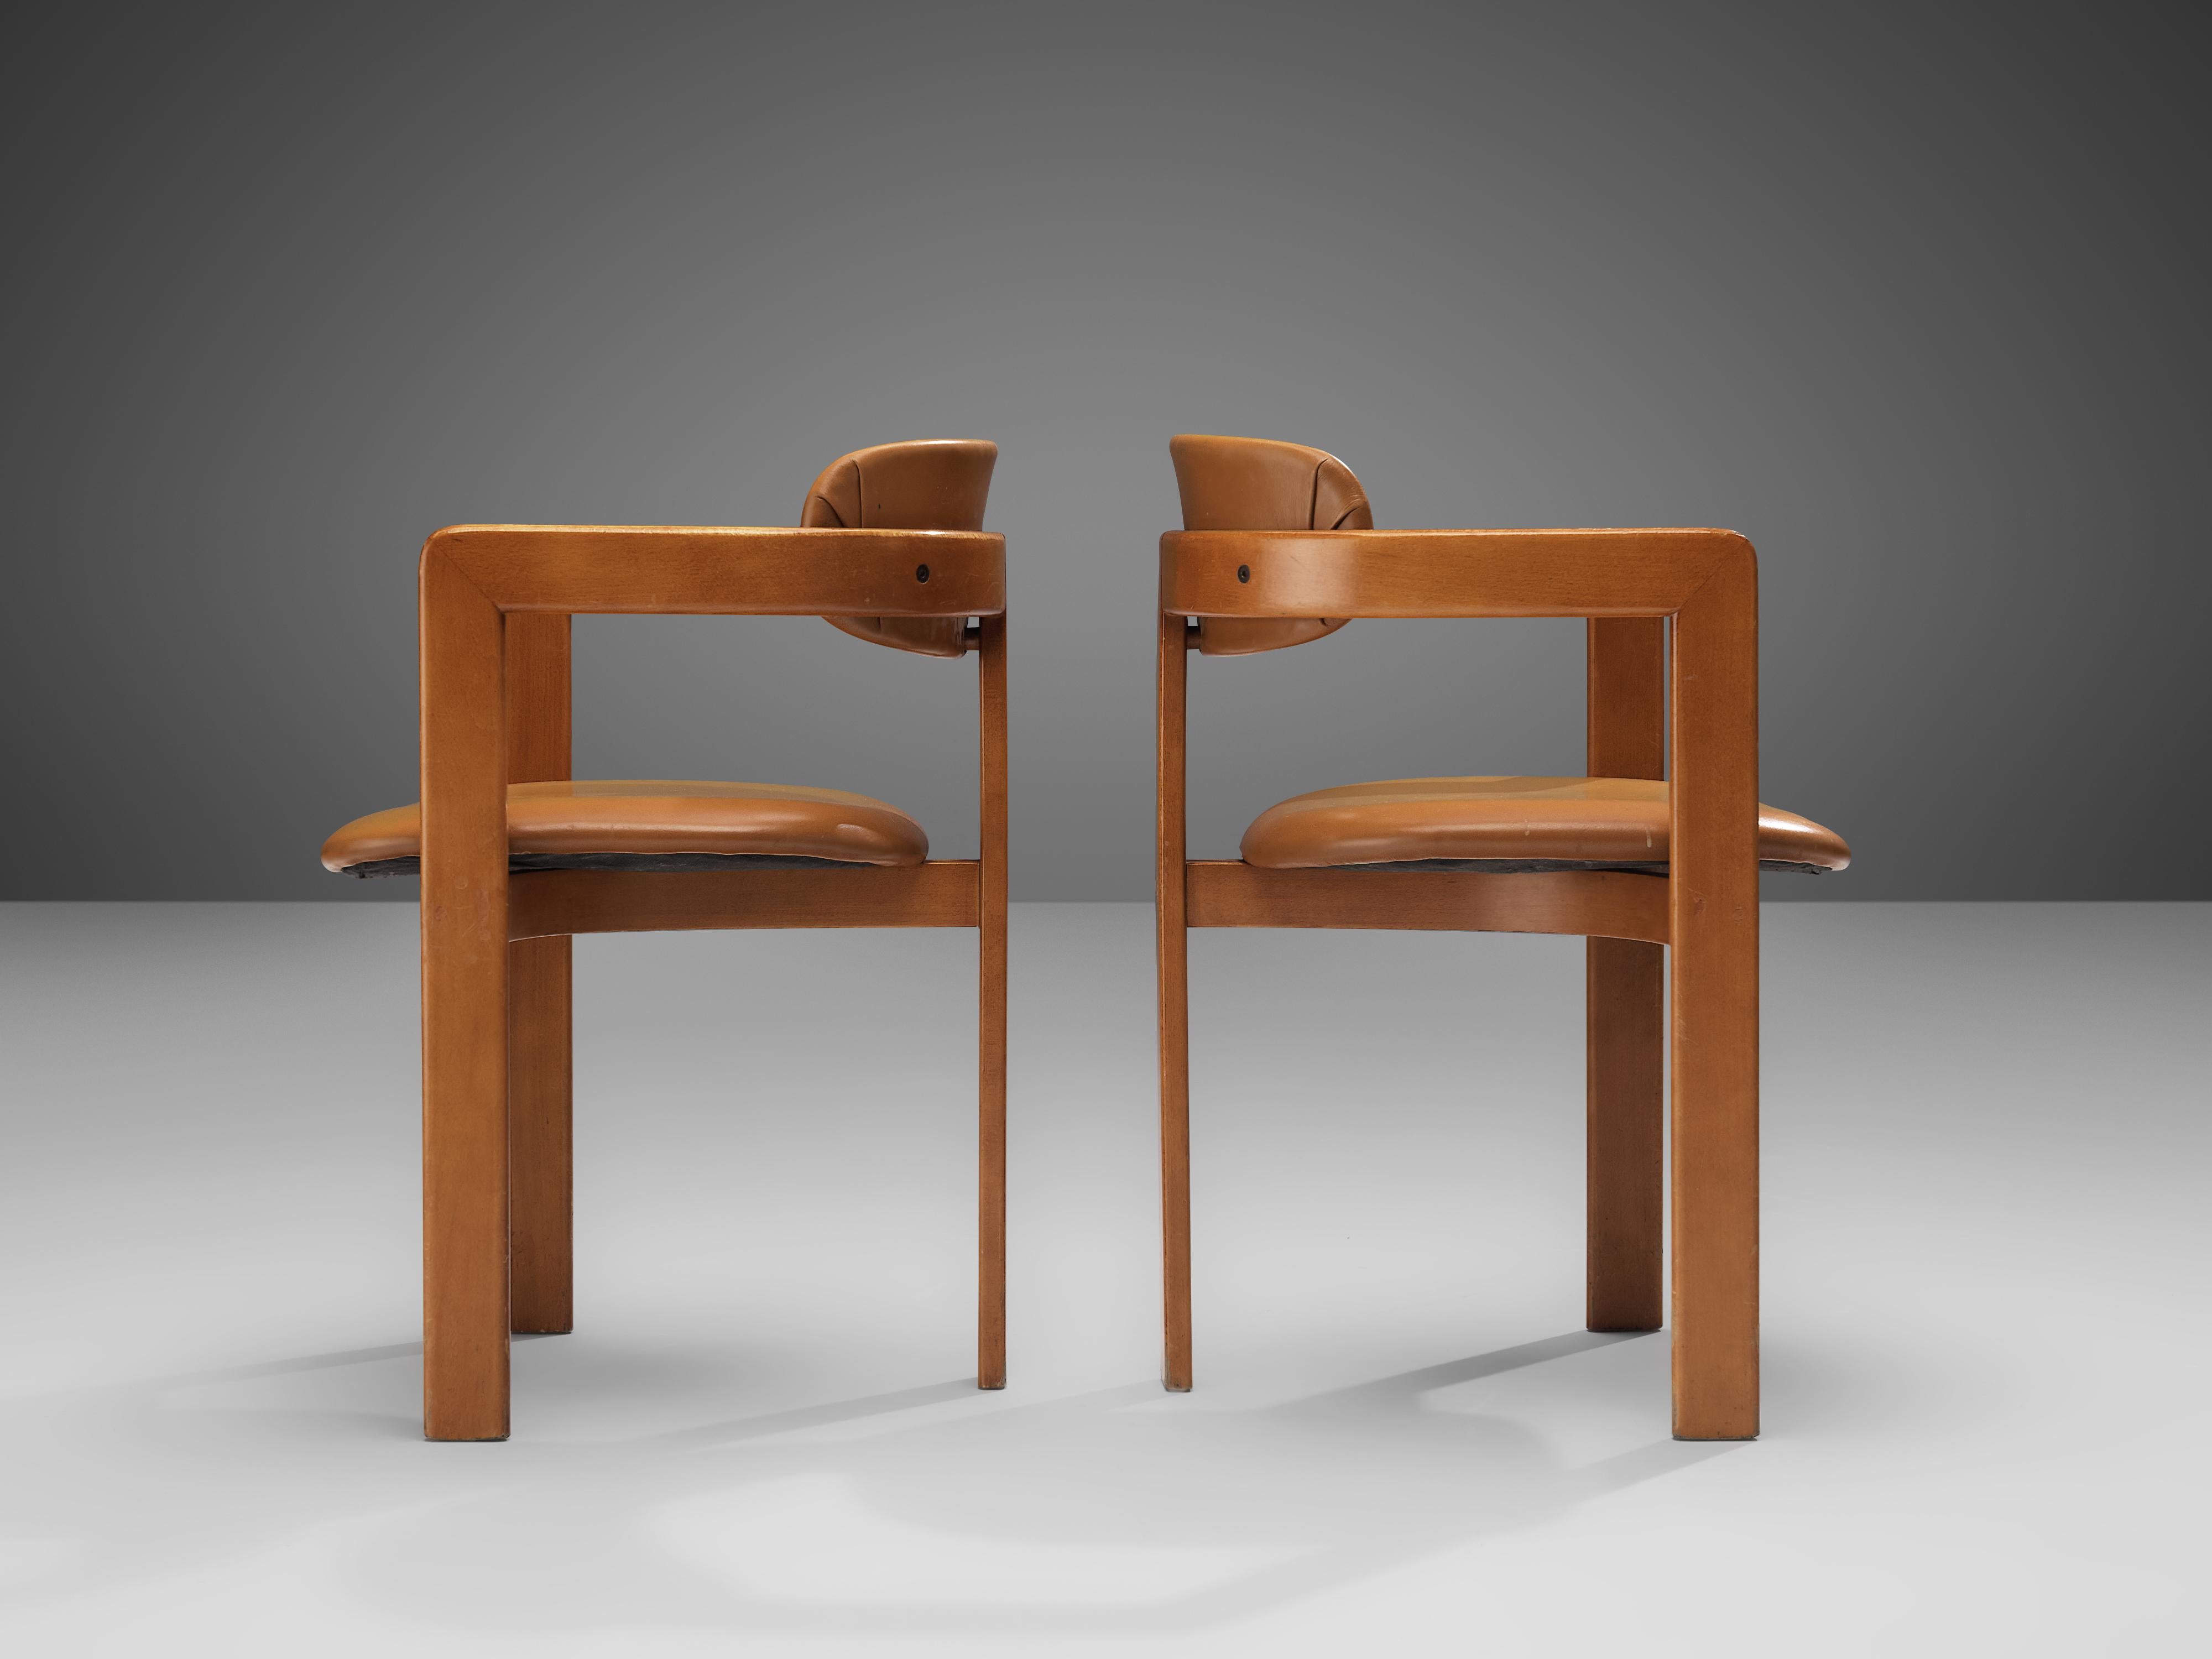 Pair of dining chairs, wood, leatherette, Italy, 1970s

This pair of Italian dining chairs has a strong resemblance to Augusto Savinis 'Pamplona' chair (1965) and Afra & Tobia Scrapas 'Pigreco' chair (1959/60) yet the designs are different in